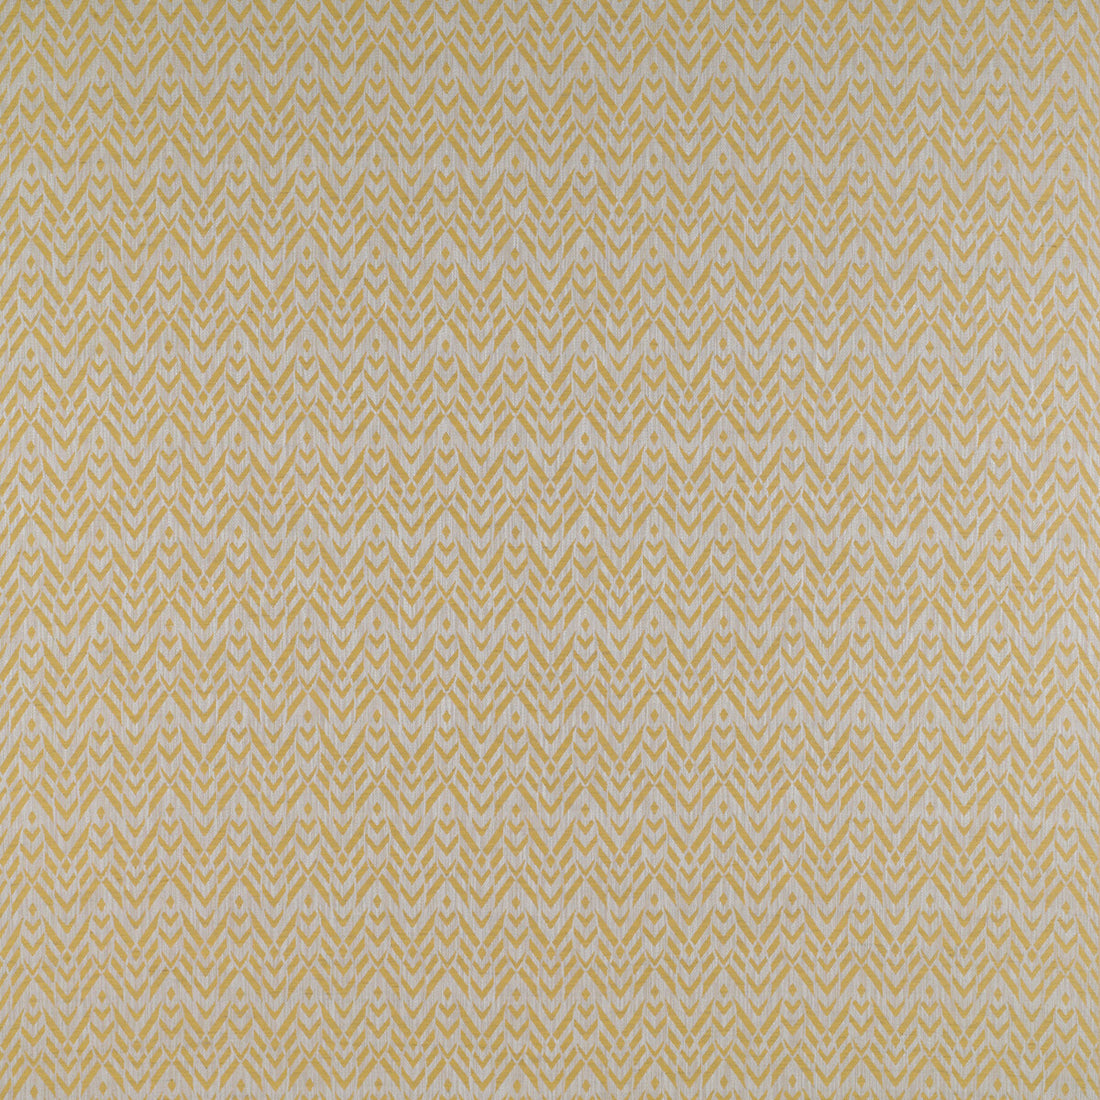 Cervantes fabric in amarillo color - pattern GDT5200.007.0 - by Gaston y Daniela in the Madrid collection